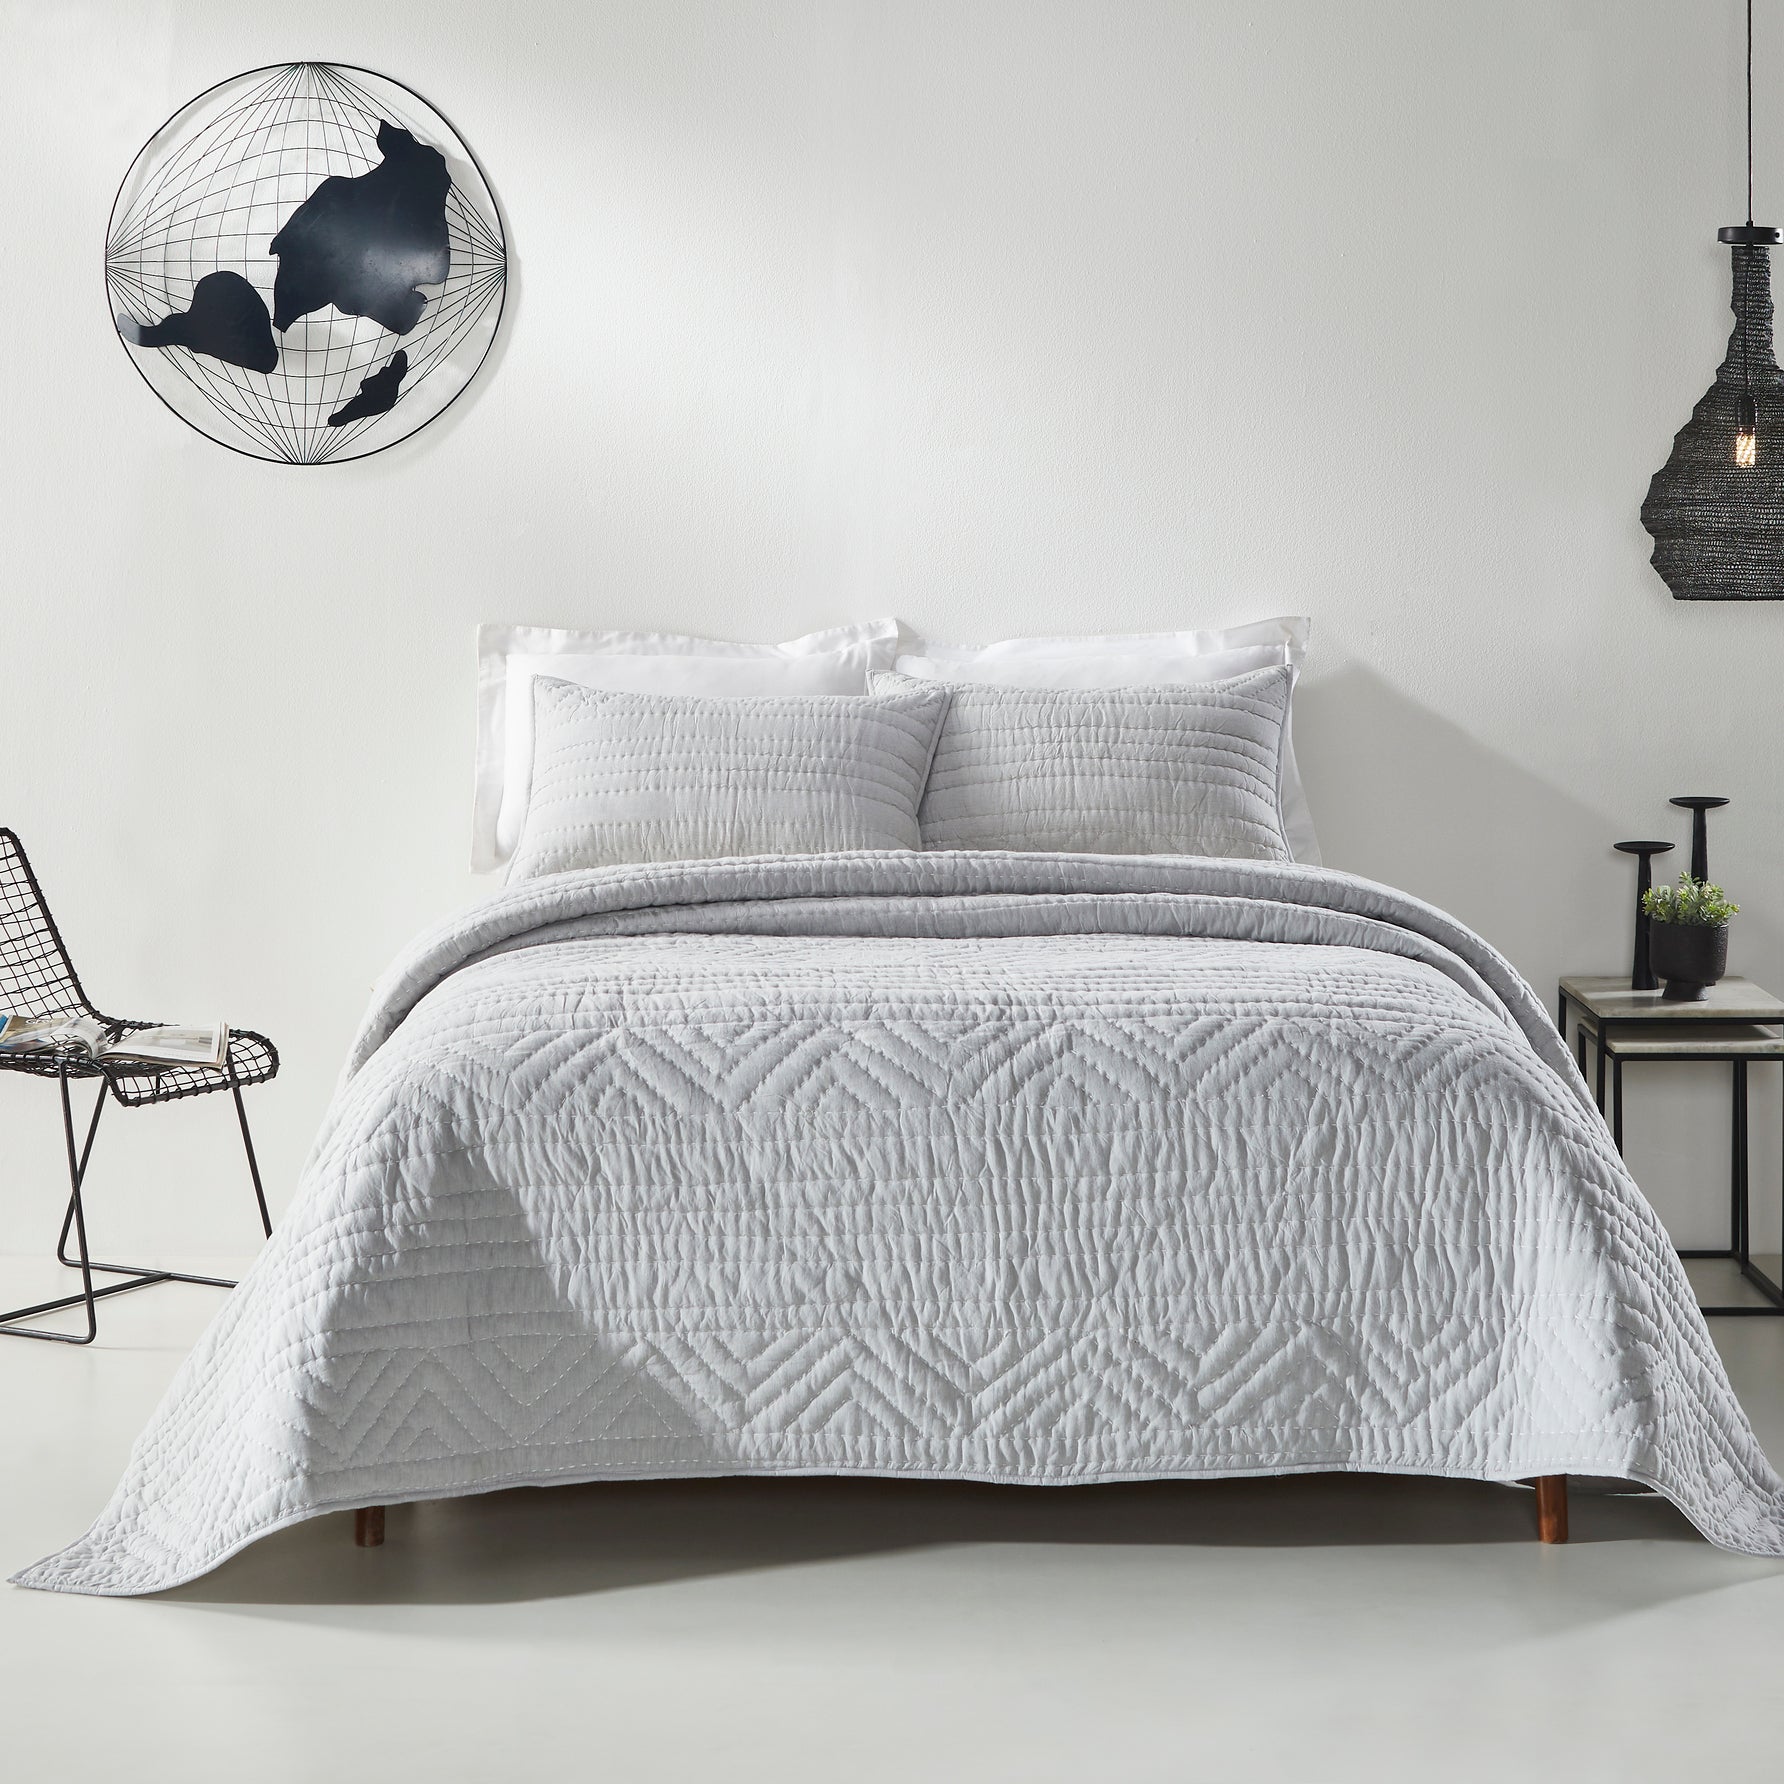 Capitol Quilted Bedding Set (3 pcs) - Home Artisan